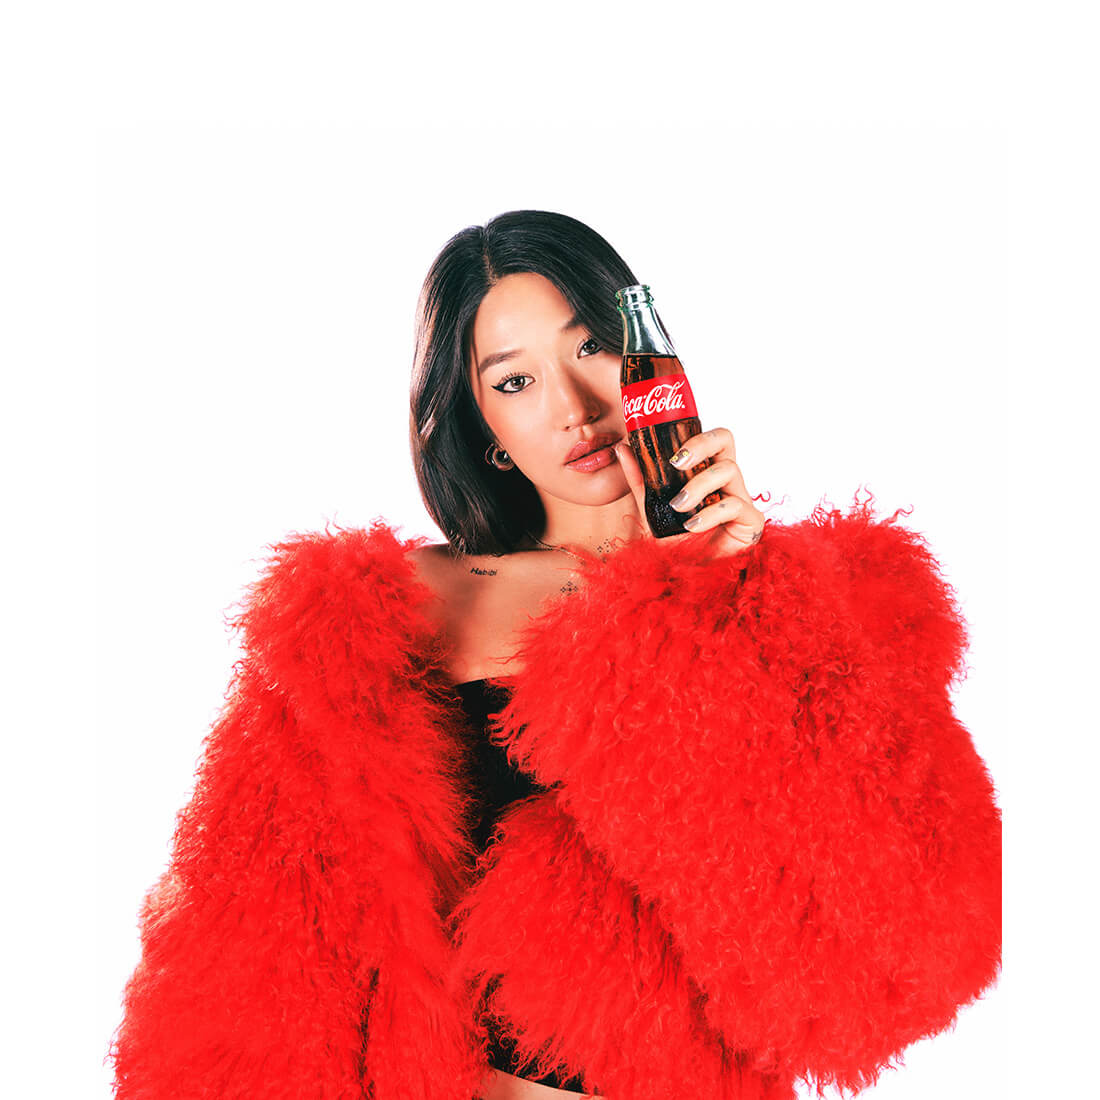 Peggy Gou with bottle of Coke